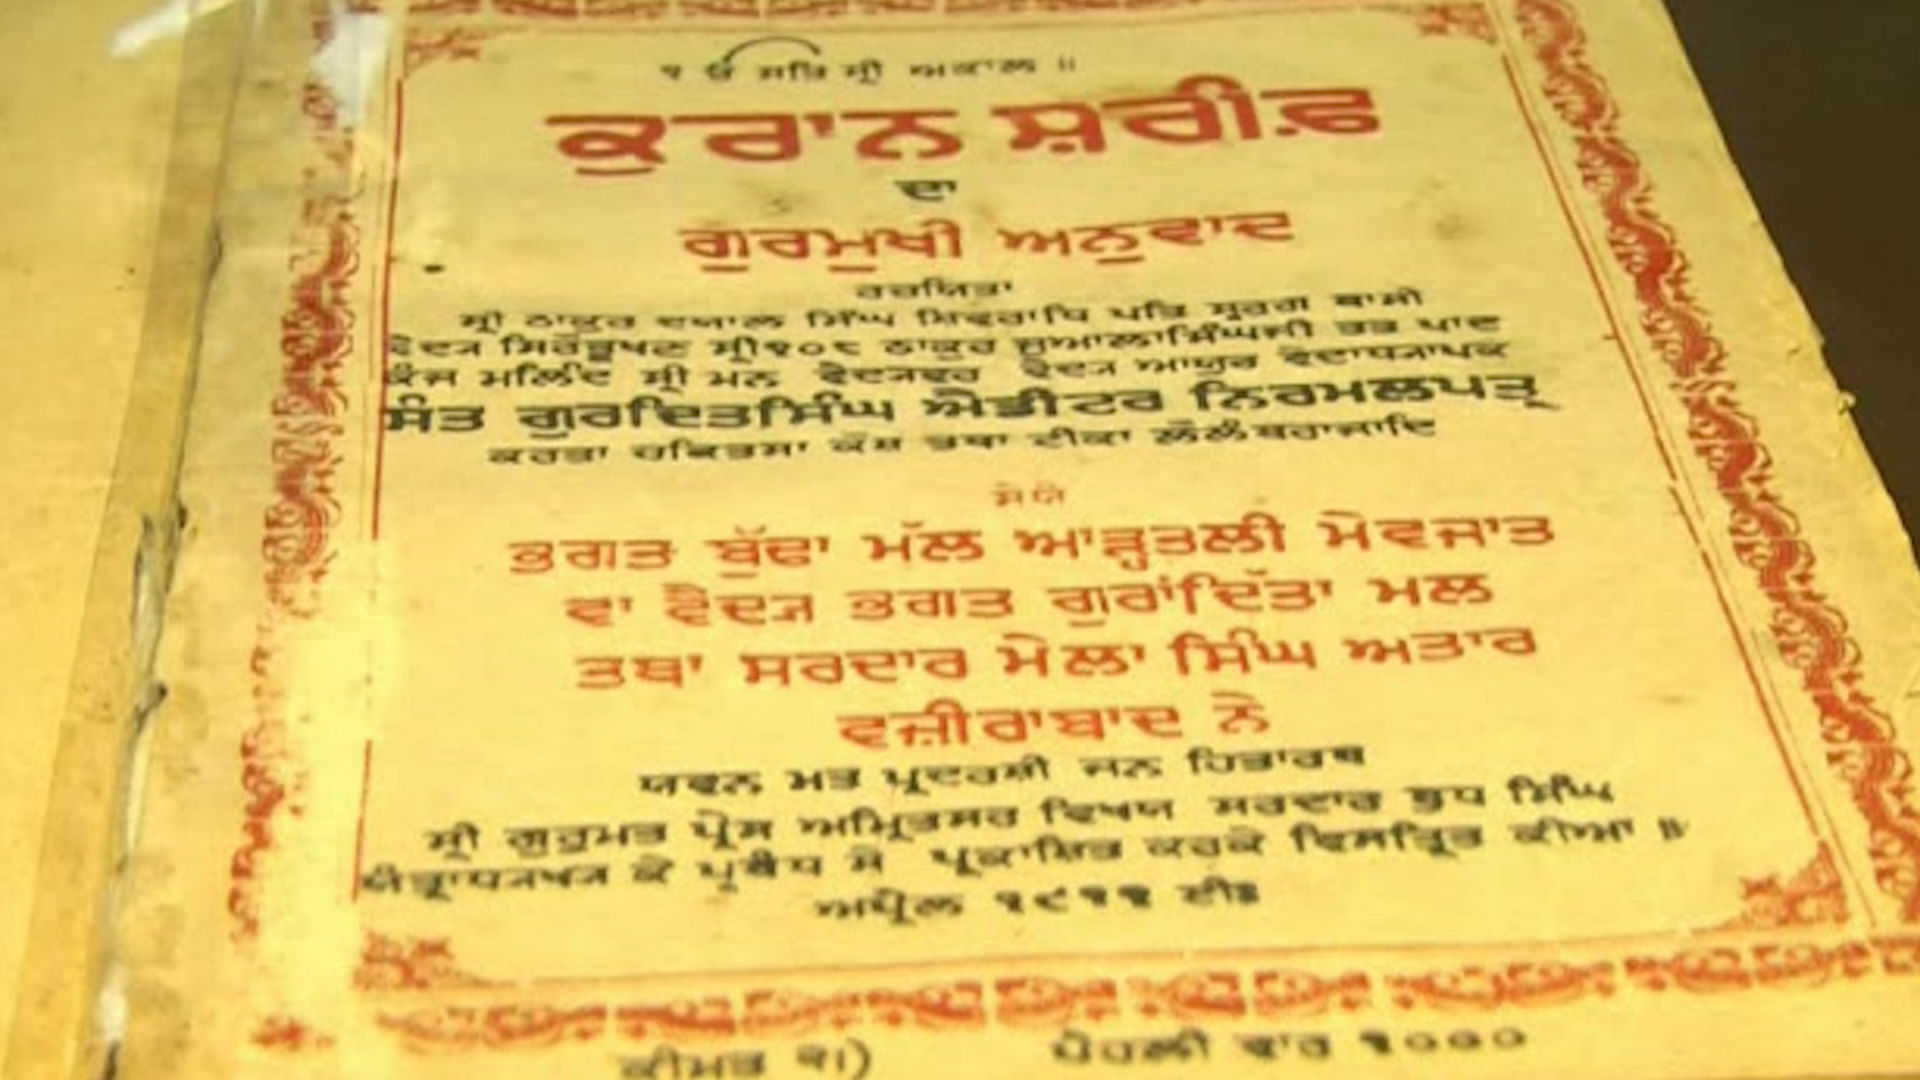 A unique 105-year-old Quran, printed in 1911 in Amritsar. (Photo: <b>The Quint</b>)